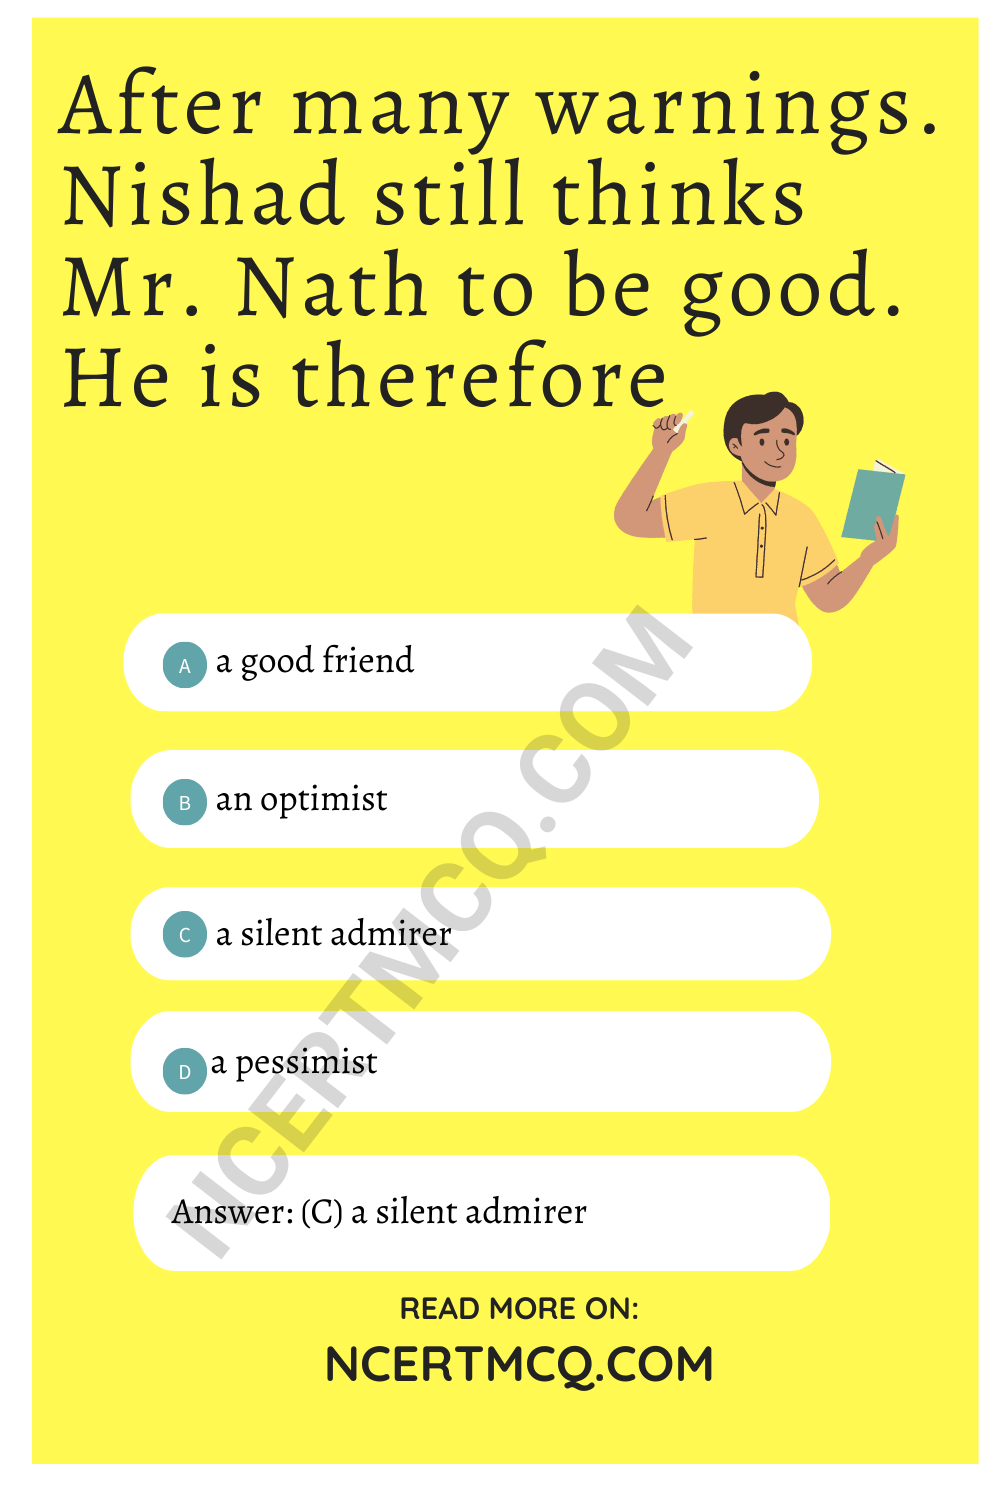 After many warnings. Nishad still thinks Mr. Nath to be good. He is therefore